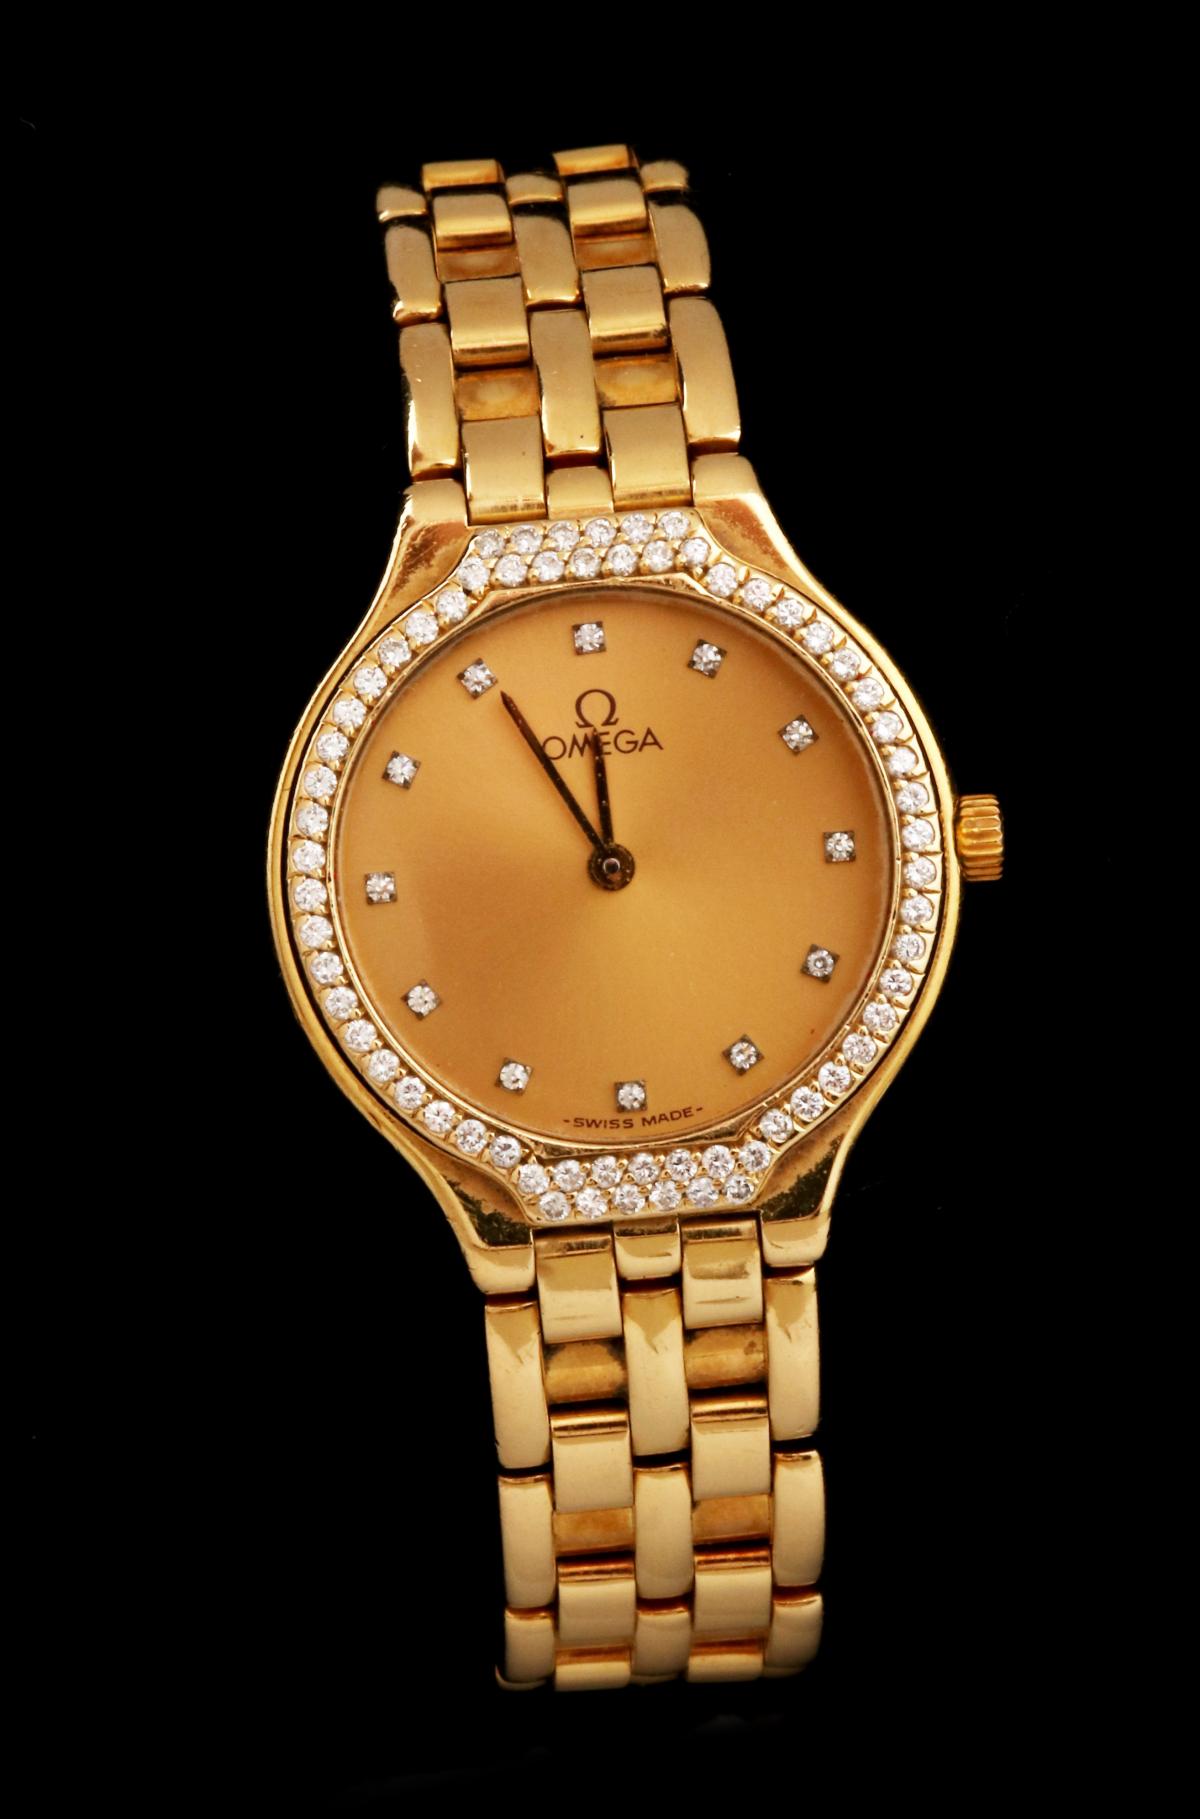 LADIES' OMEGA DEVILLE 18K GOLD WATCH WITH DIAMONDS